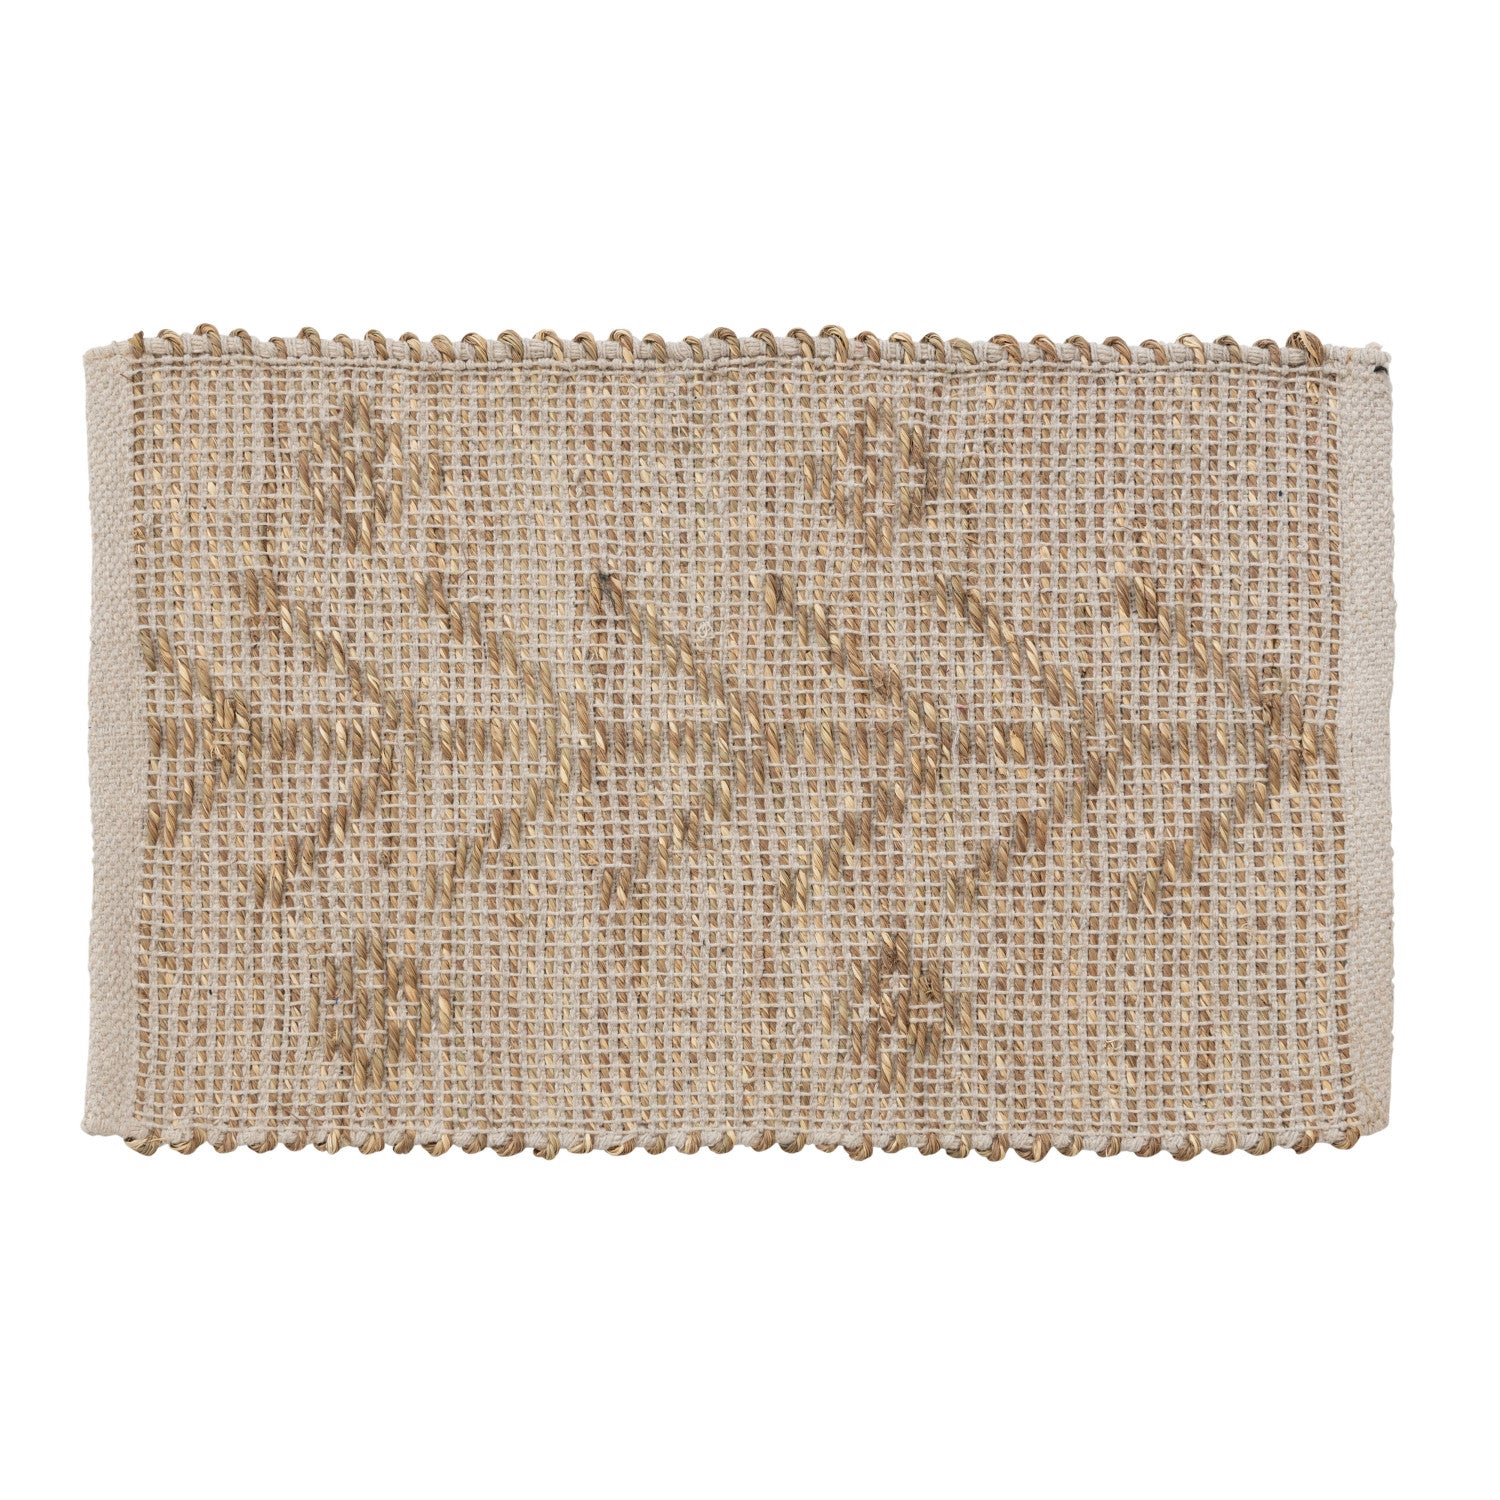 Two Sided Woven Placemat